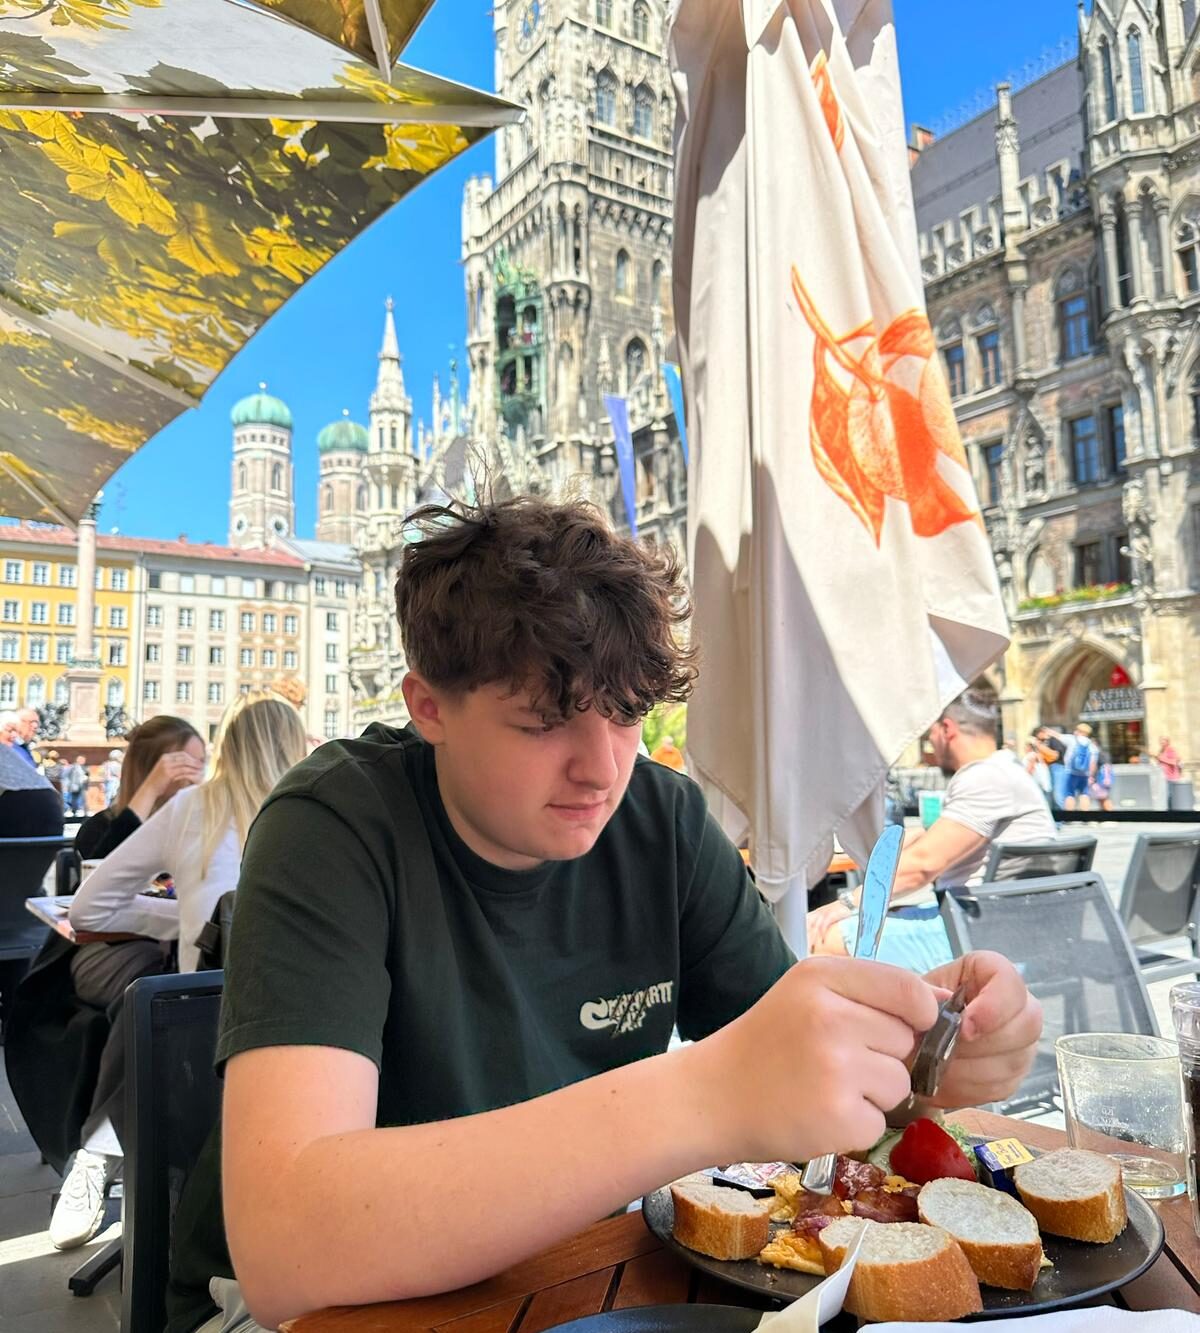 A young teenage boy eating bread and cheese on a sunny square in Europe